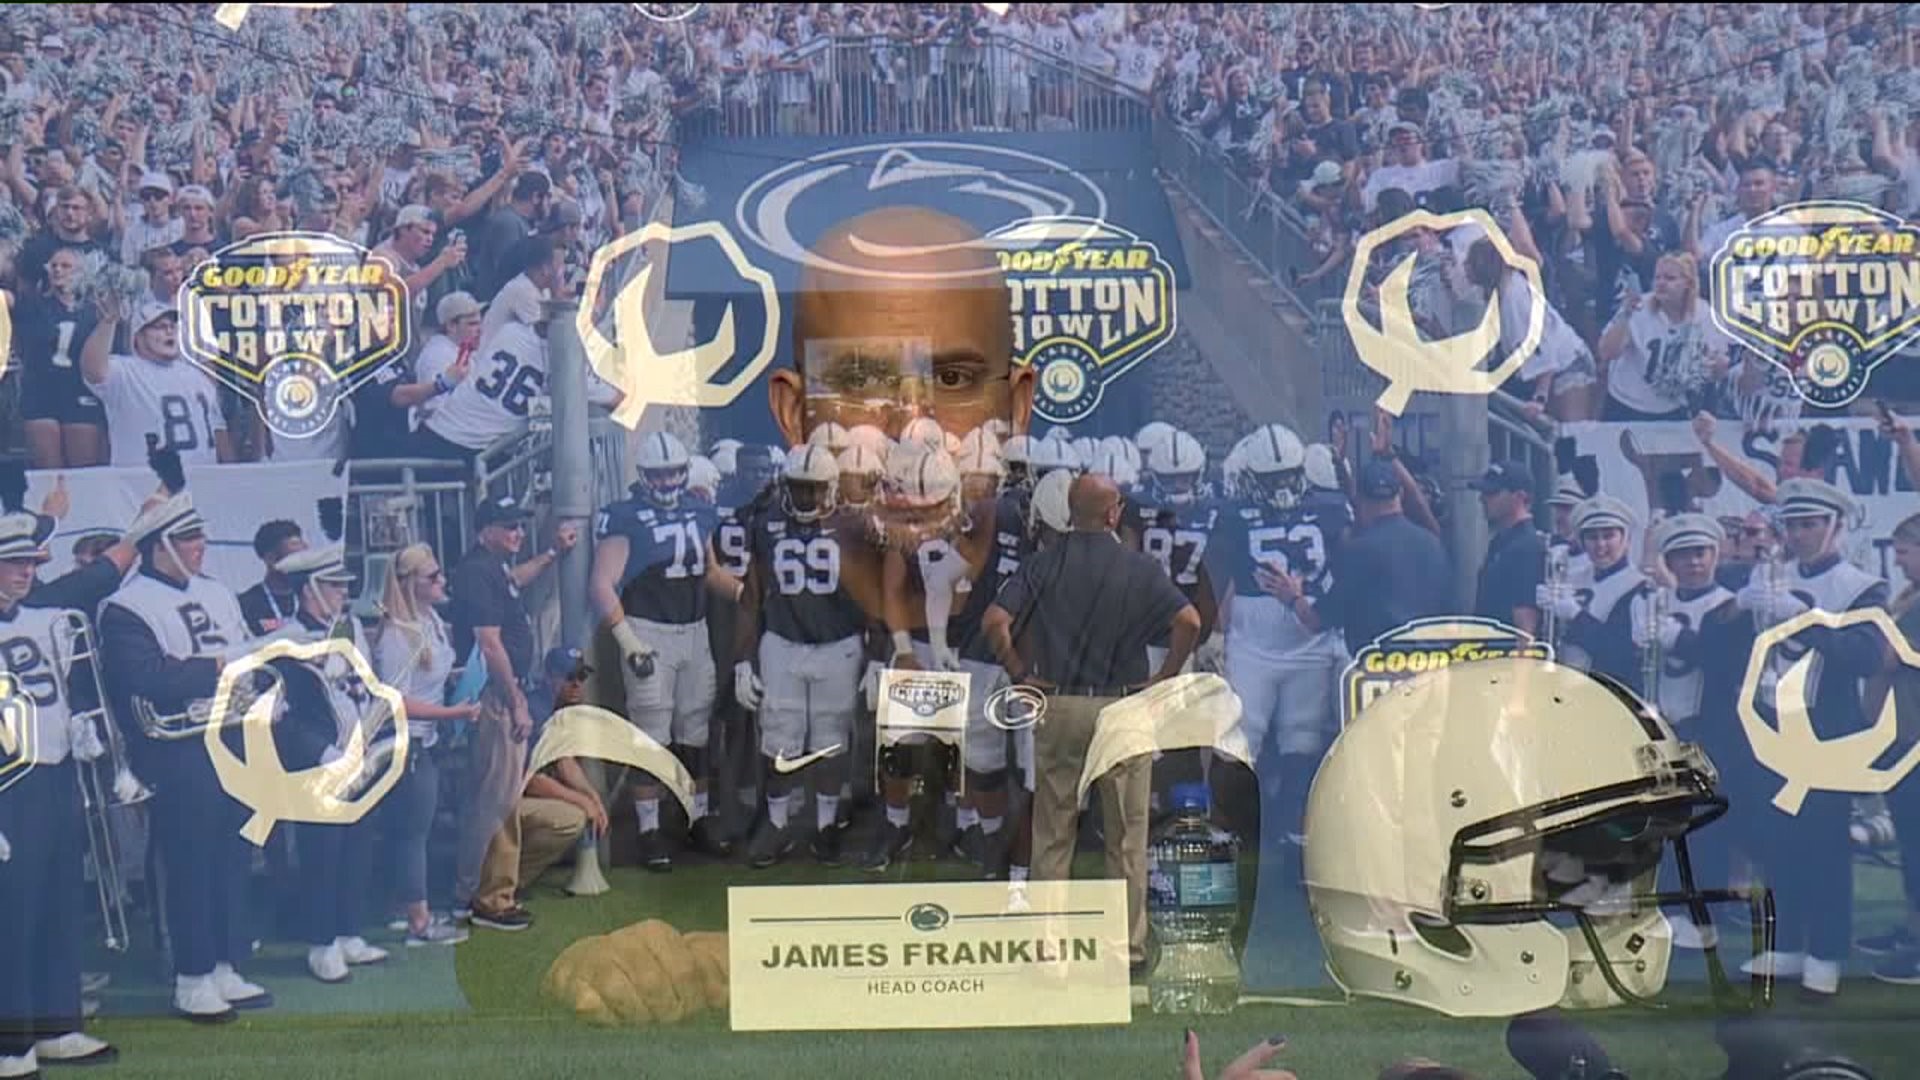 James Franklin speaks about new offensive coordinator Kirk Ciarrocca from Minnesota